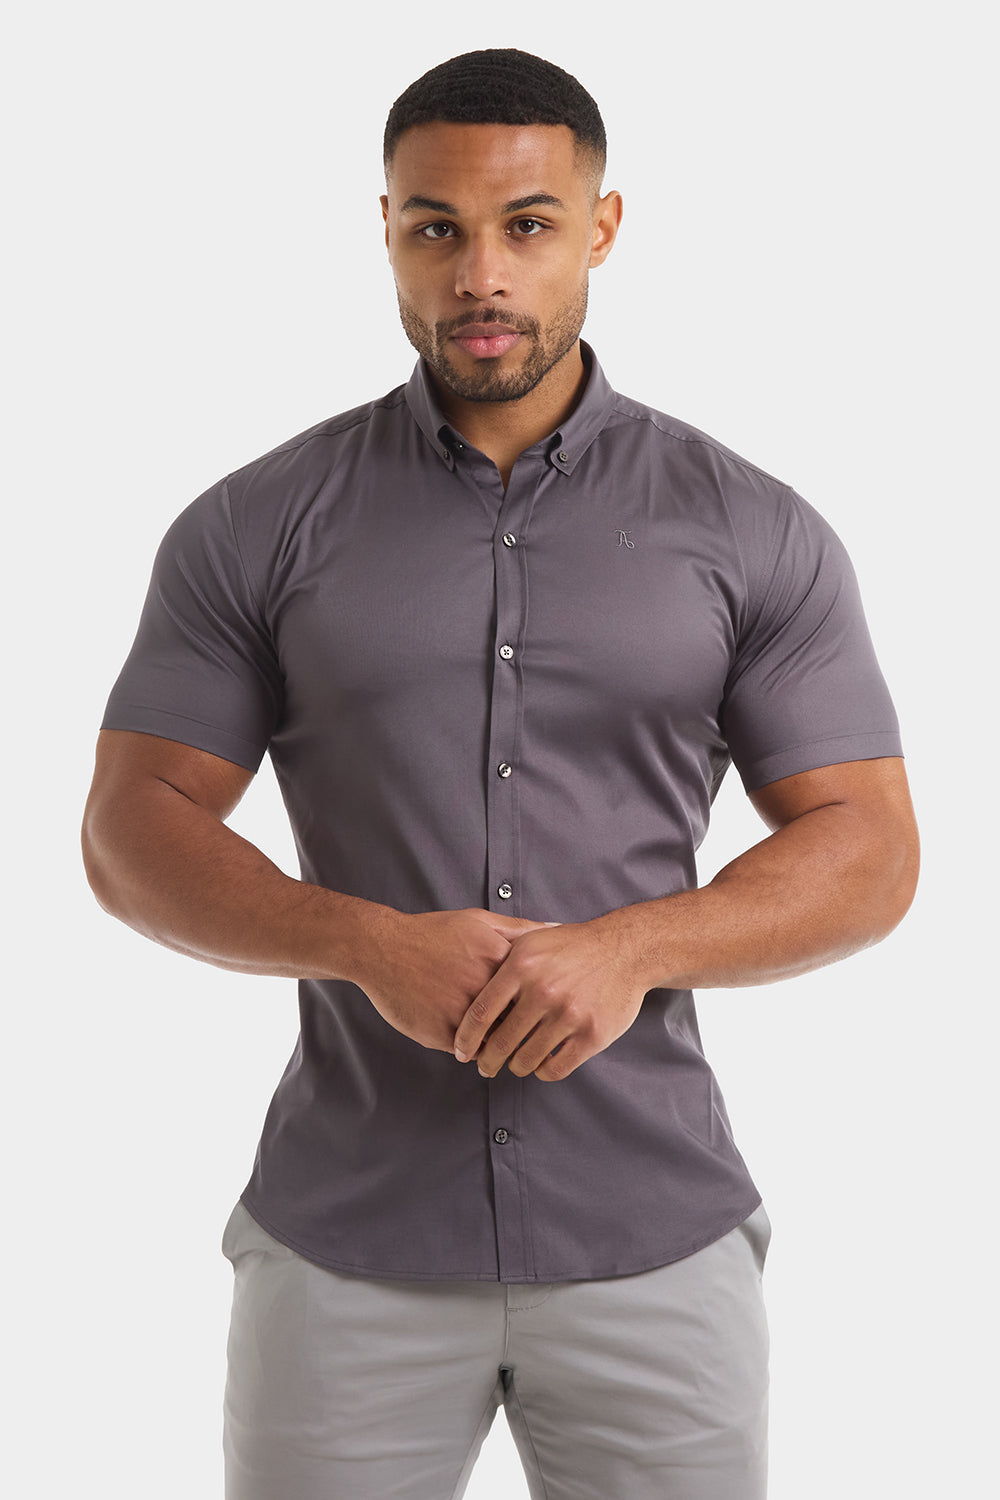 Muscle Fit Short Sleeve Signature Shirt in Grey - TAILORED ATHLETE - ROW